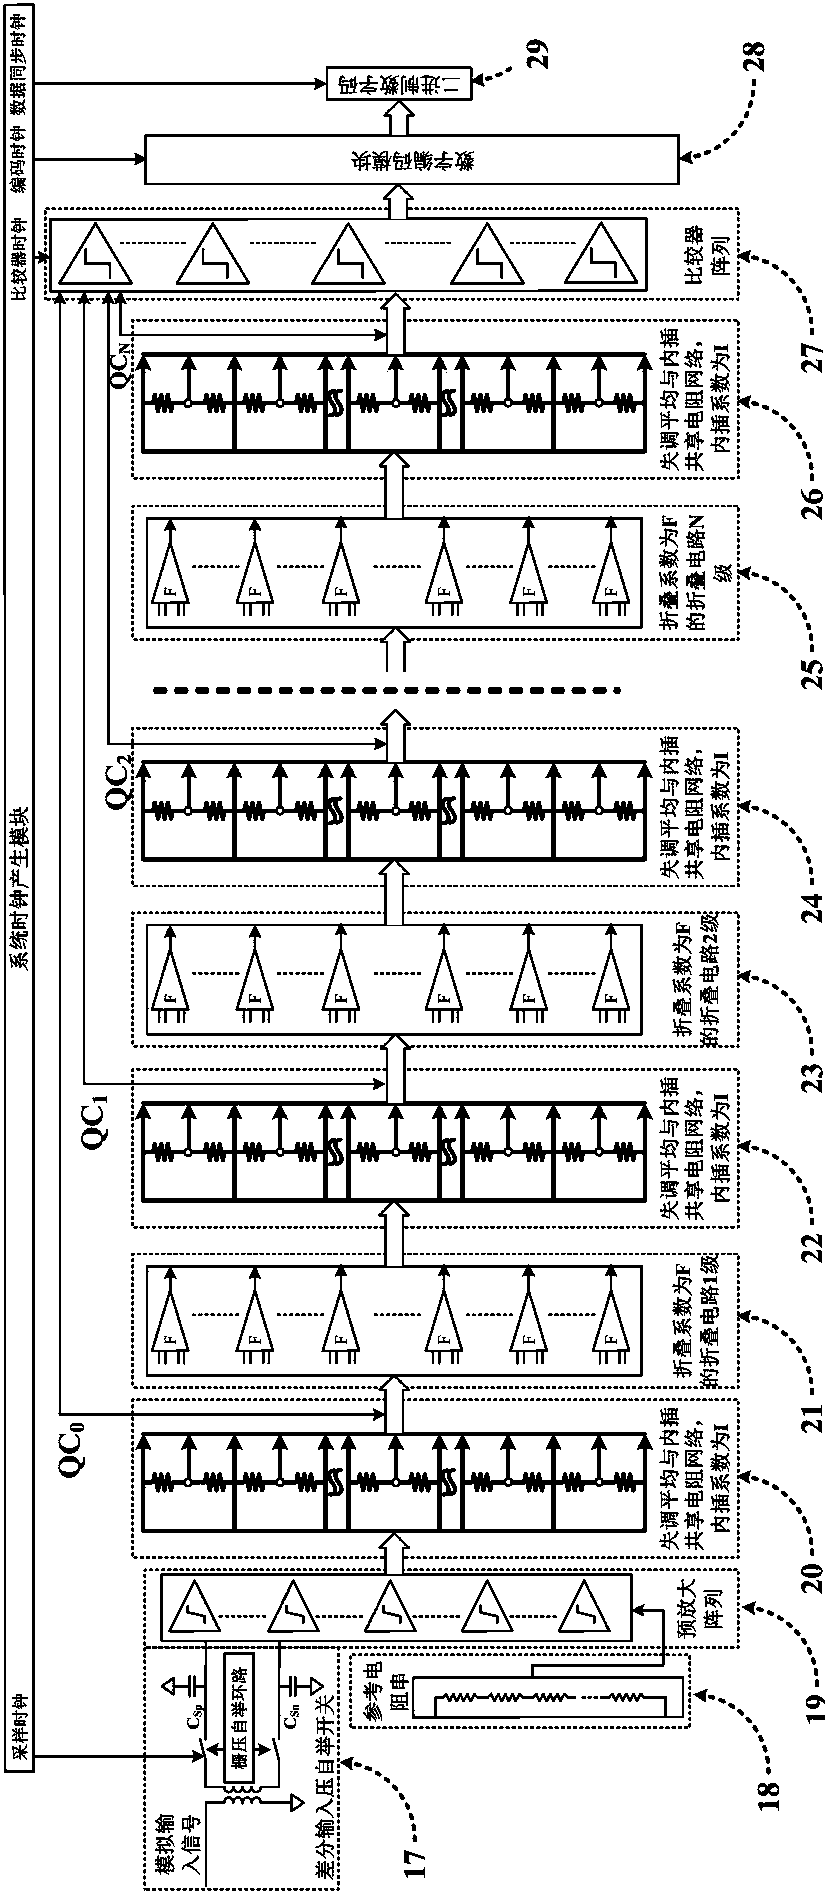 Folding and interpolating analog-digital converter employing offset averaging and interpolation shared resistance network